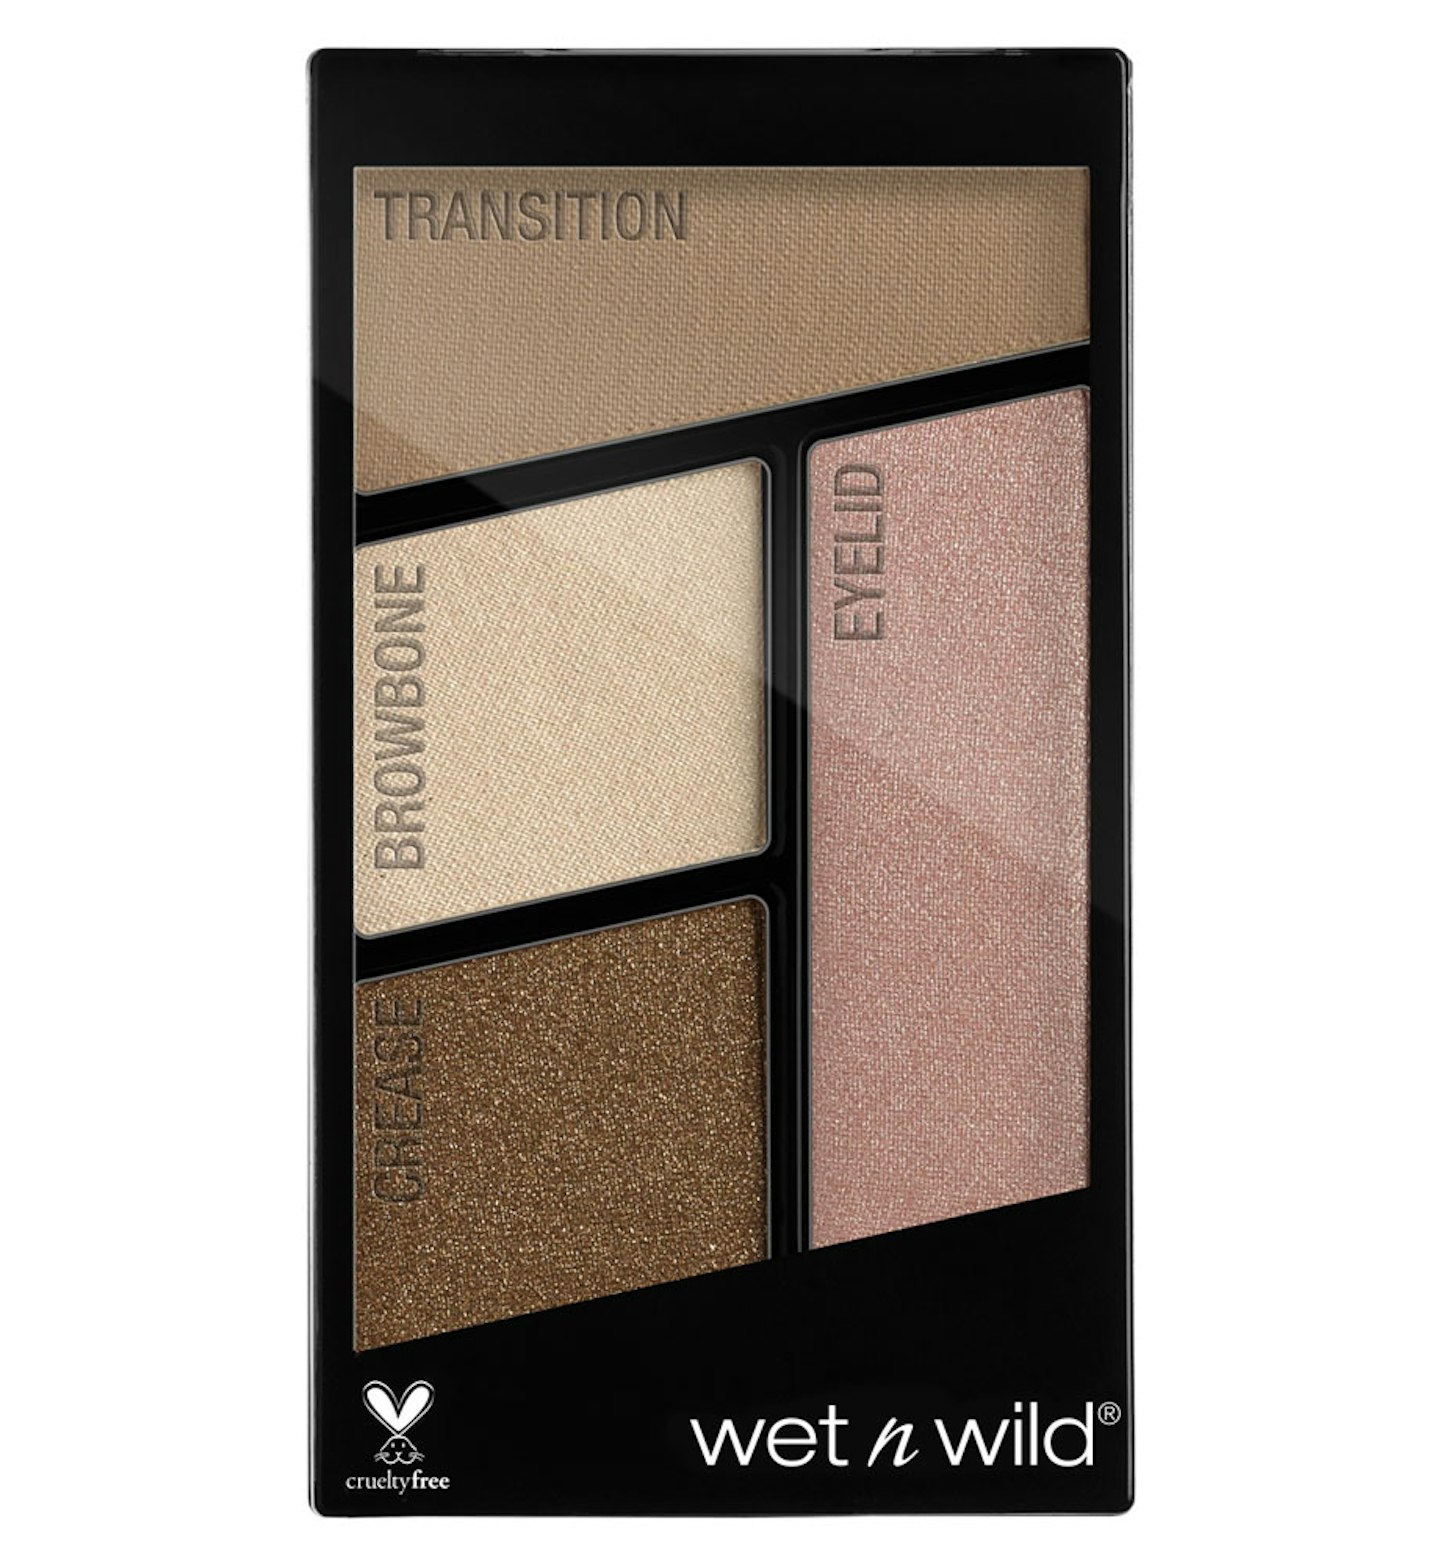 wet n wild Colour Icon Eyeshadow Quads in Walking On Eggshells, 3.99 from Boots